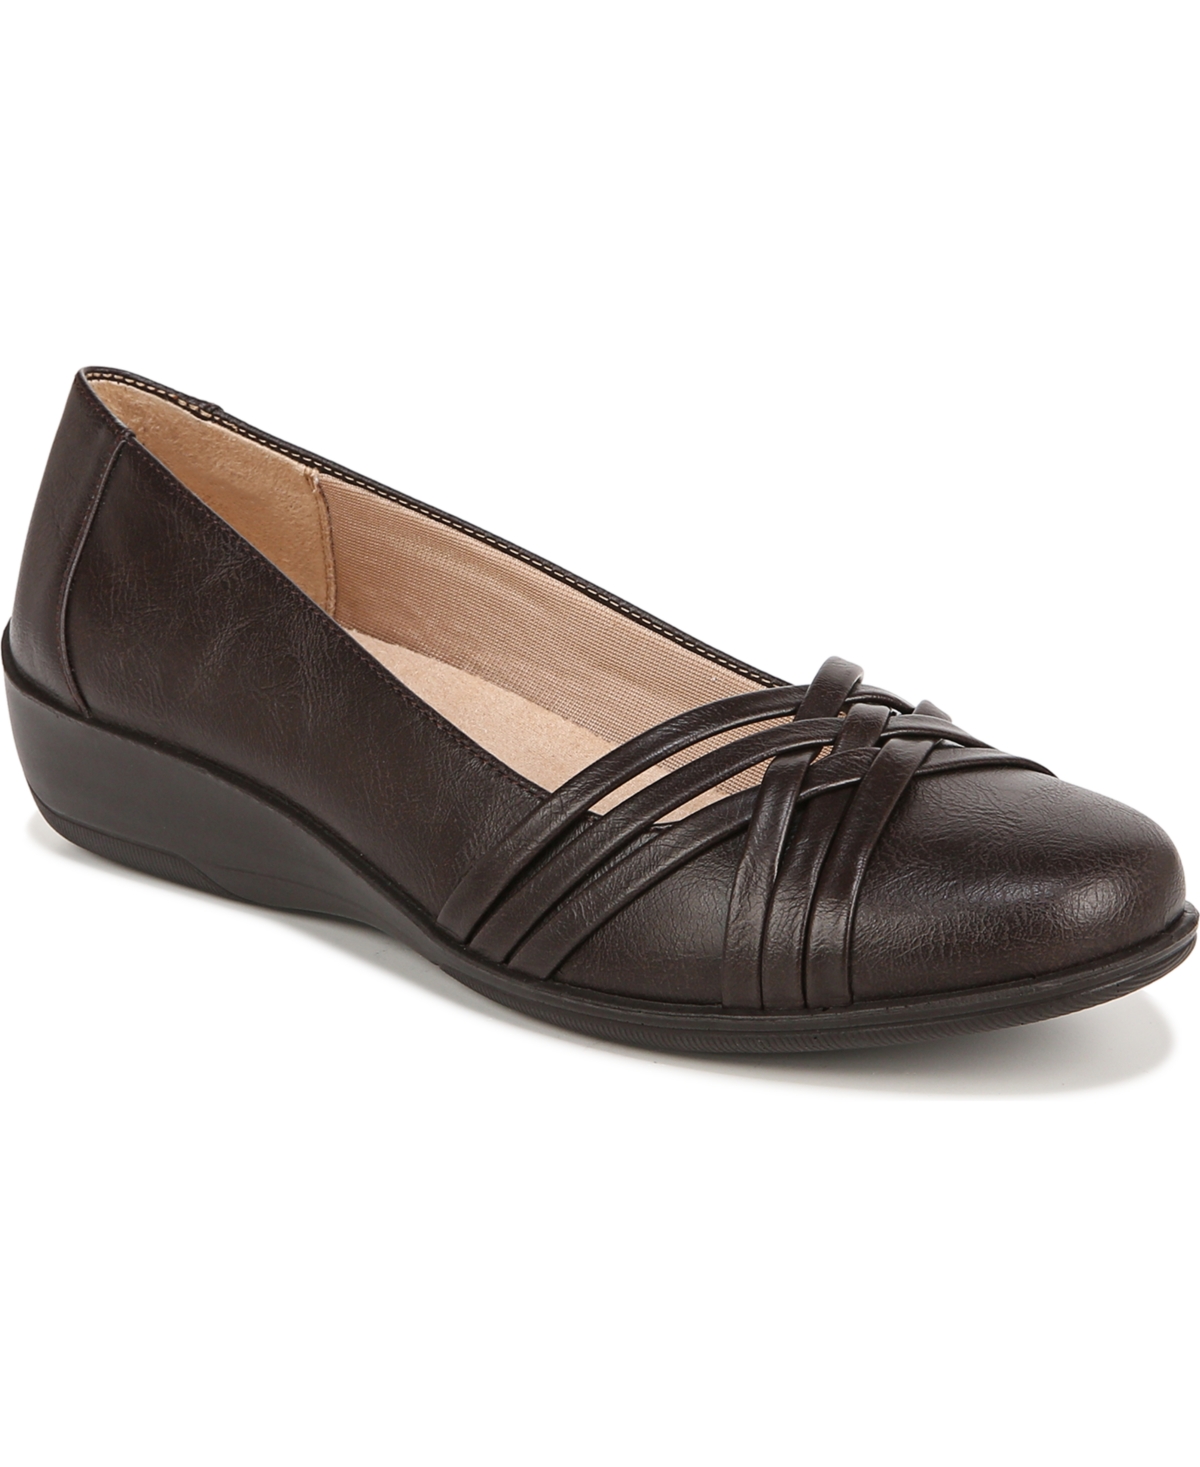 Shop Lifestride Women's Incredible Slip On Ballet Flats In Brown Faux Leather